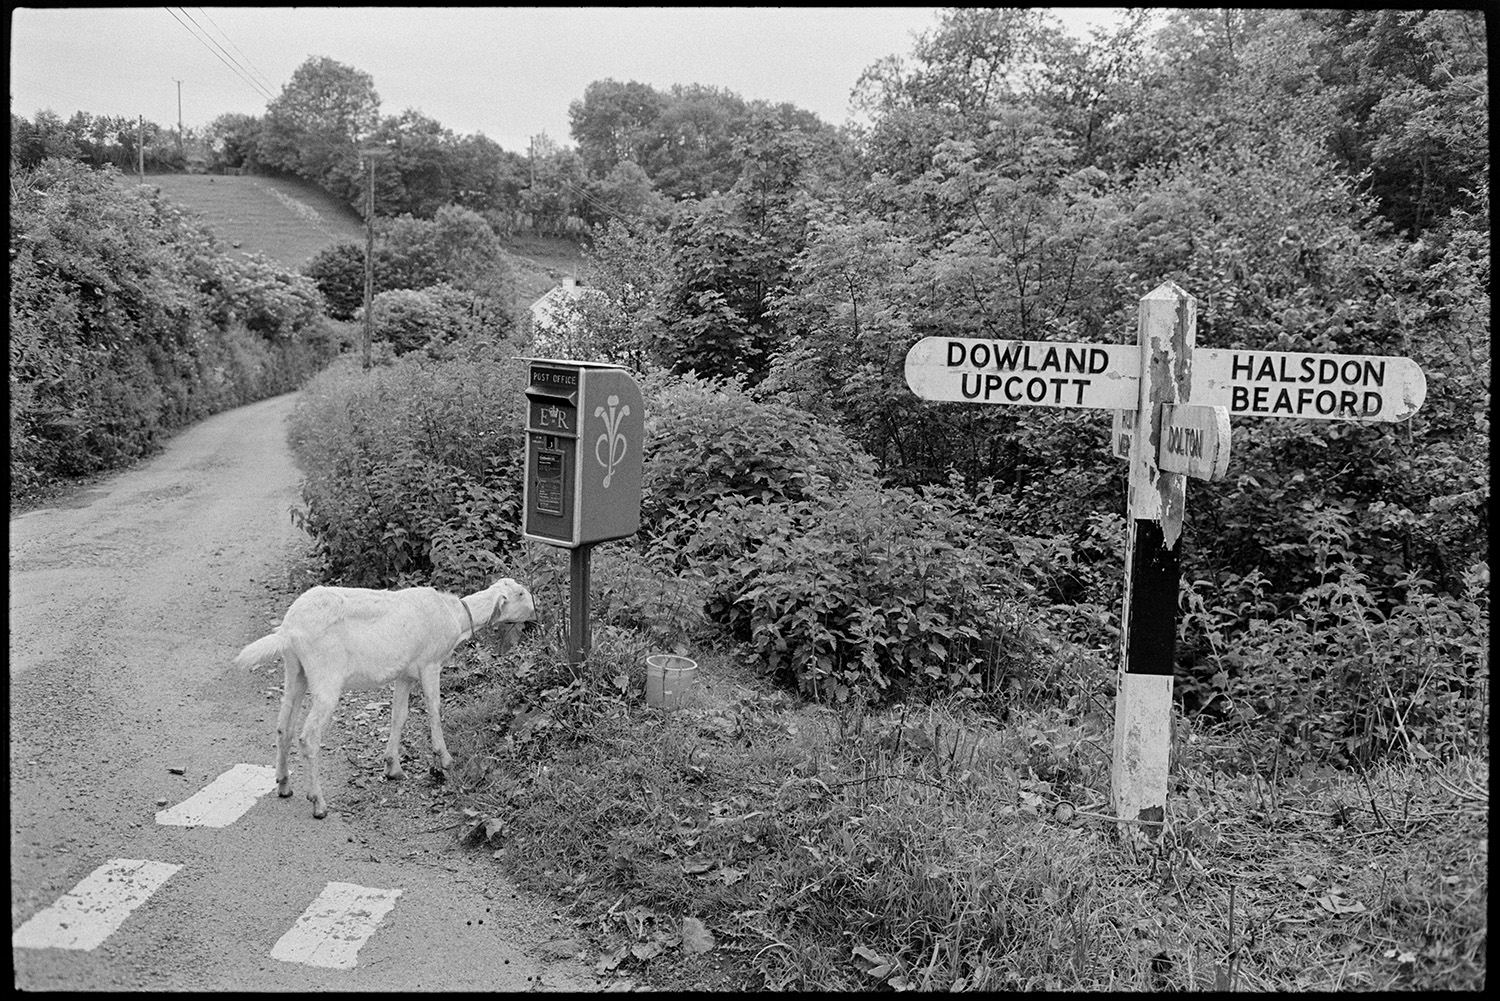 Goat, letter box, road sign.
[Cross roads at Woolridge Cross, Dolton, showing a road, a signpost and a goat standing in front of a Post box.]